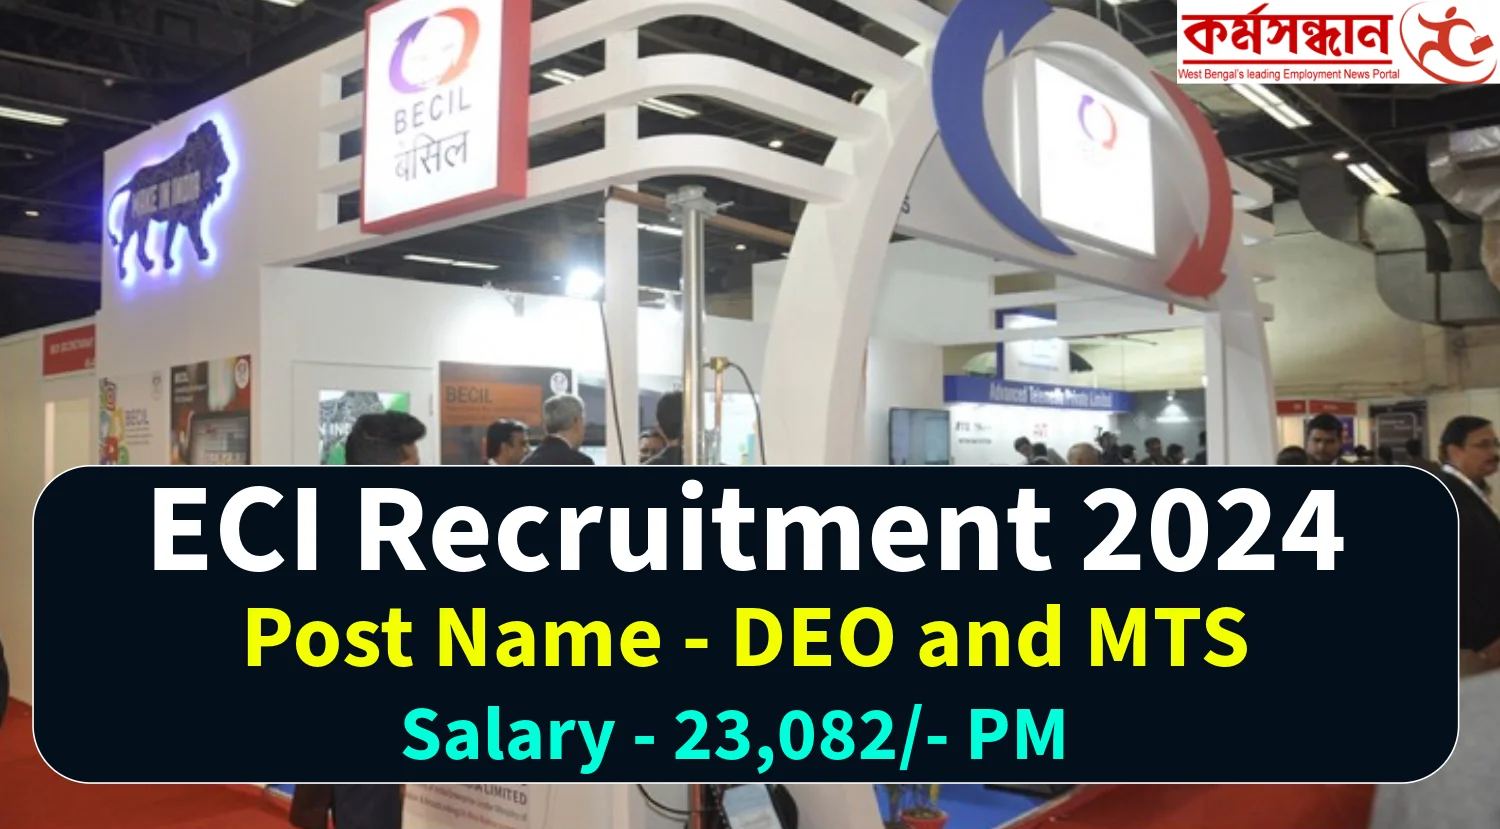 ECI Recruitment 2024 for DEO, MTS Posts